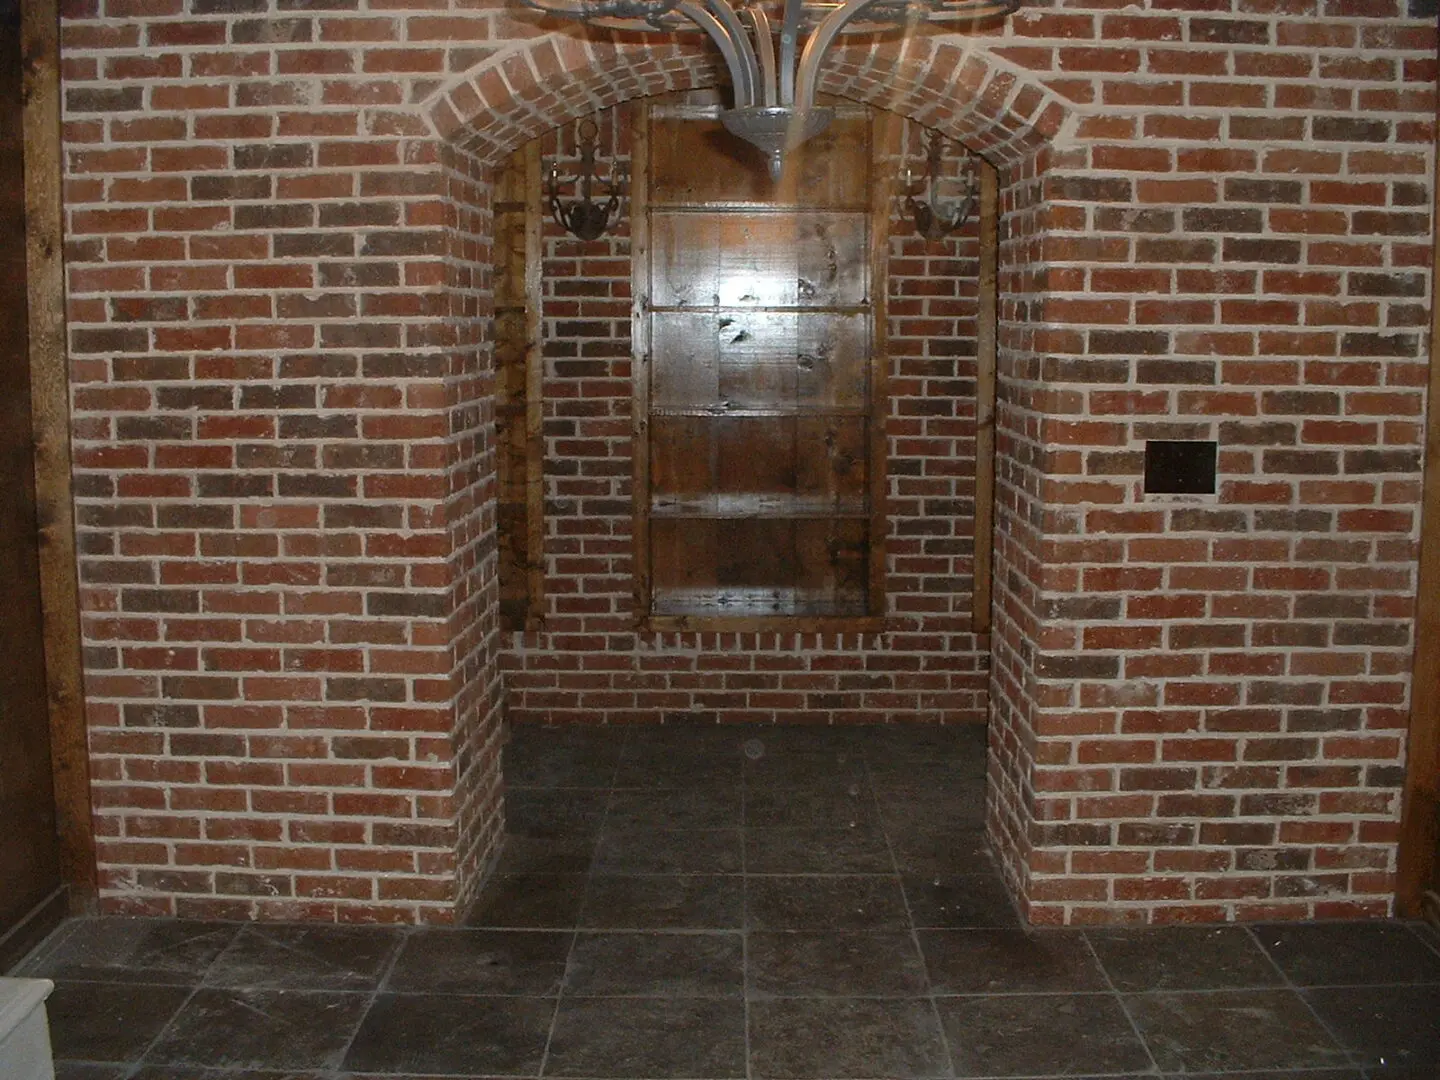 A brick wall with two arches and a door.